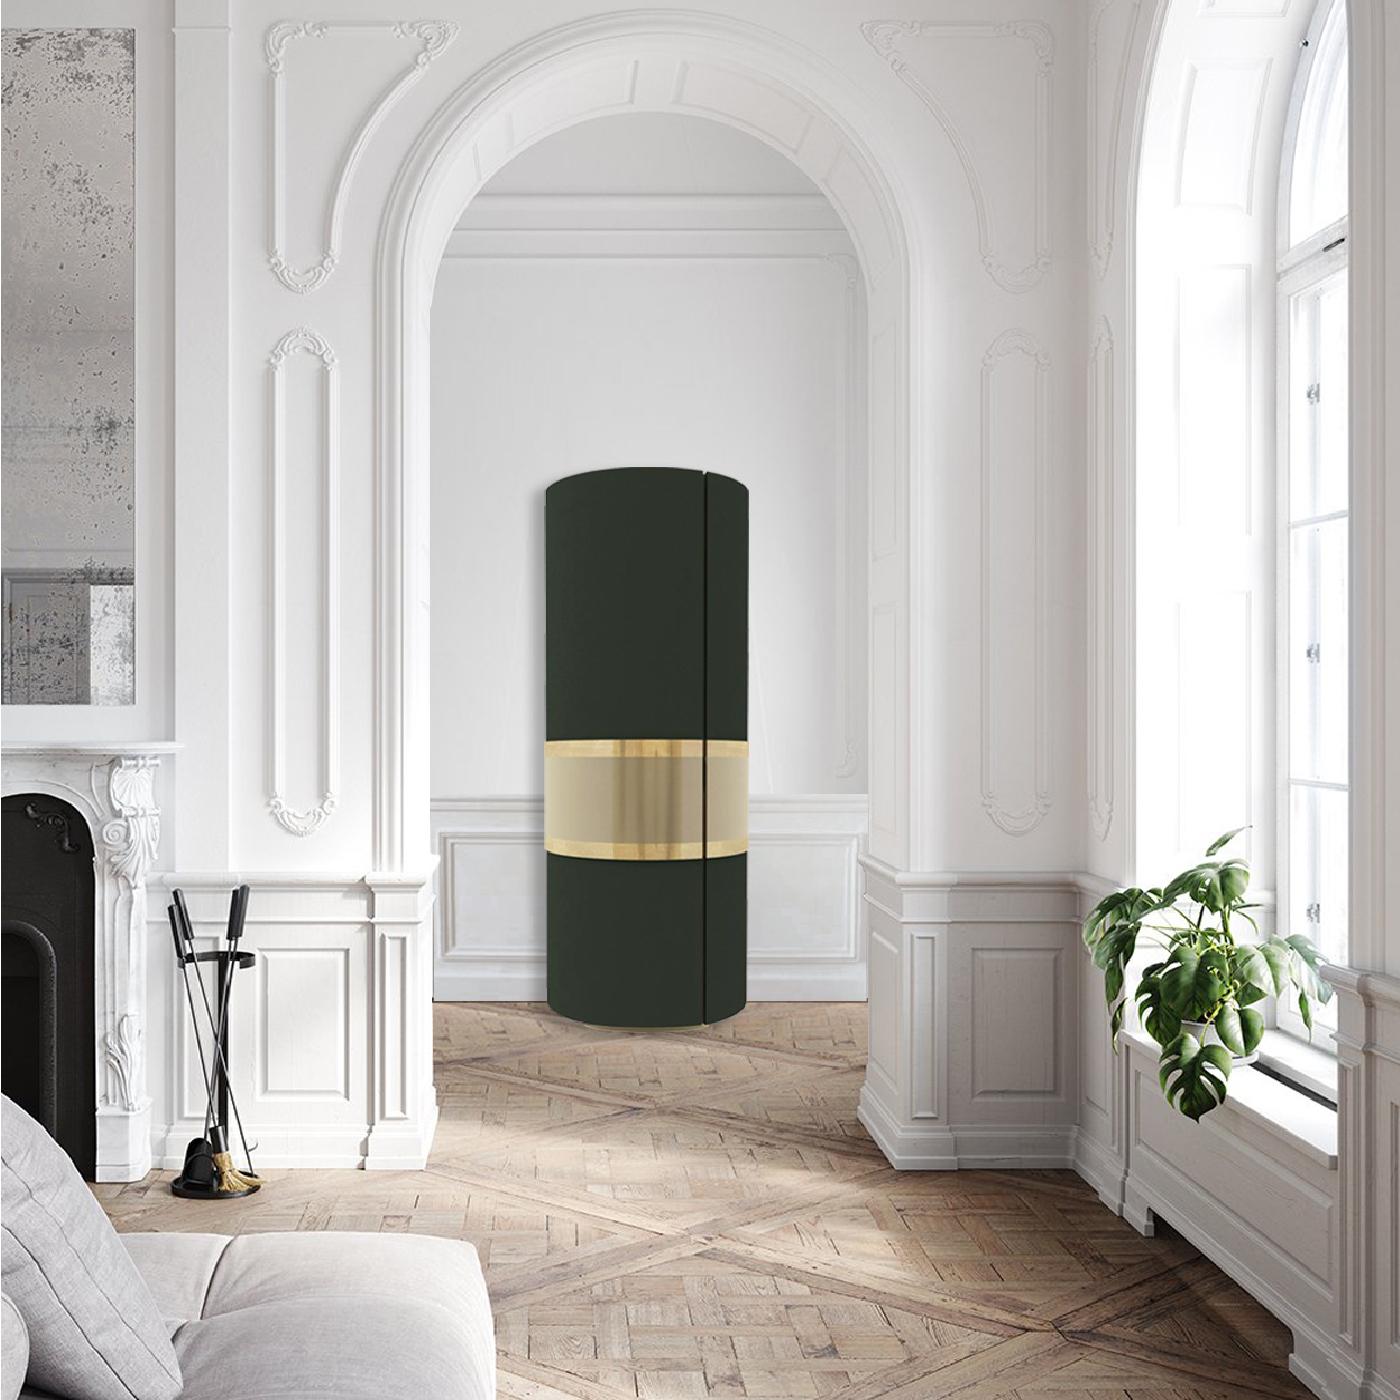 A sturdy vertical cylinder, this cabinet will make a bold statement in a modern decor. Ideal to store refined glassware, its elegant sculptural flair is enhanced by the brass central detail boasting a polished gold finish, exquisitely contrasting